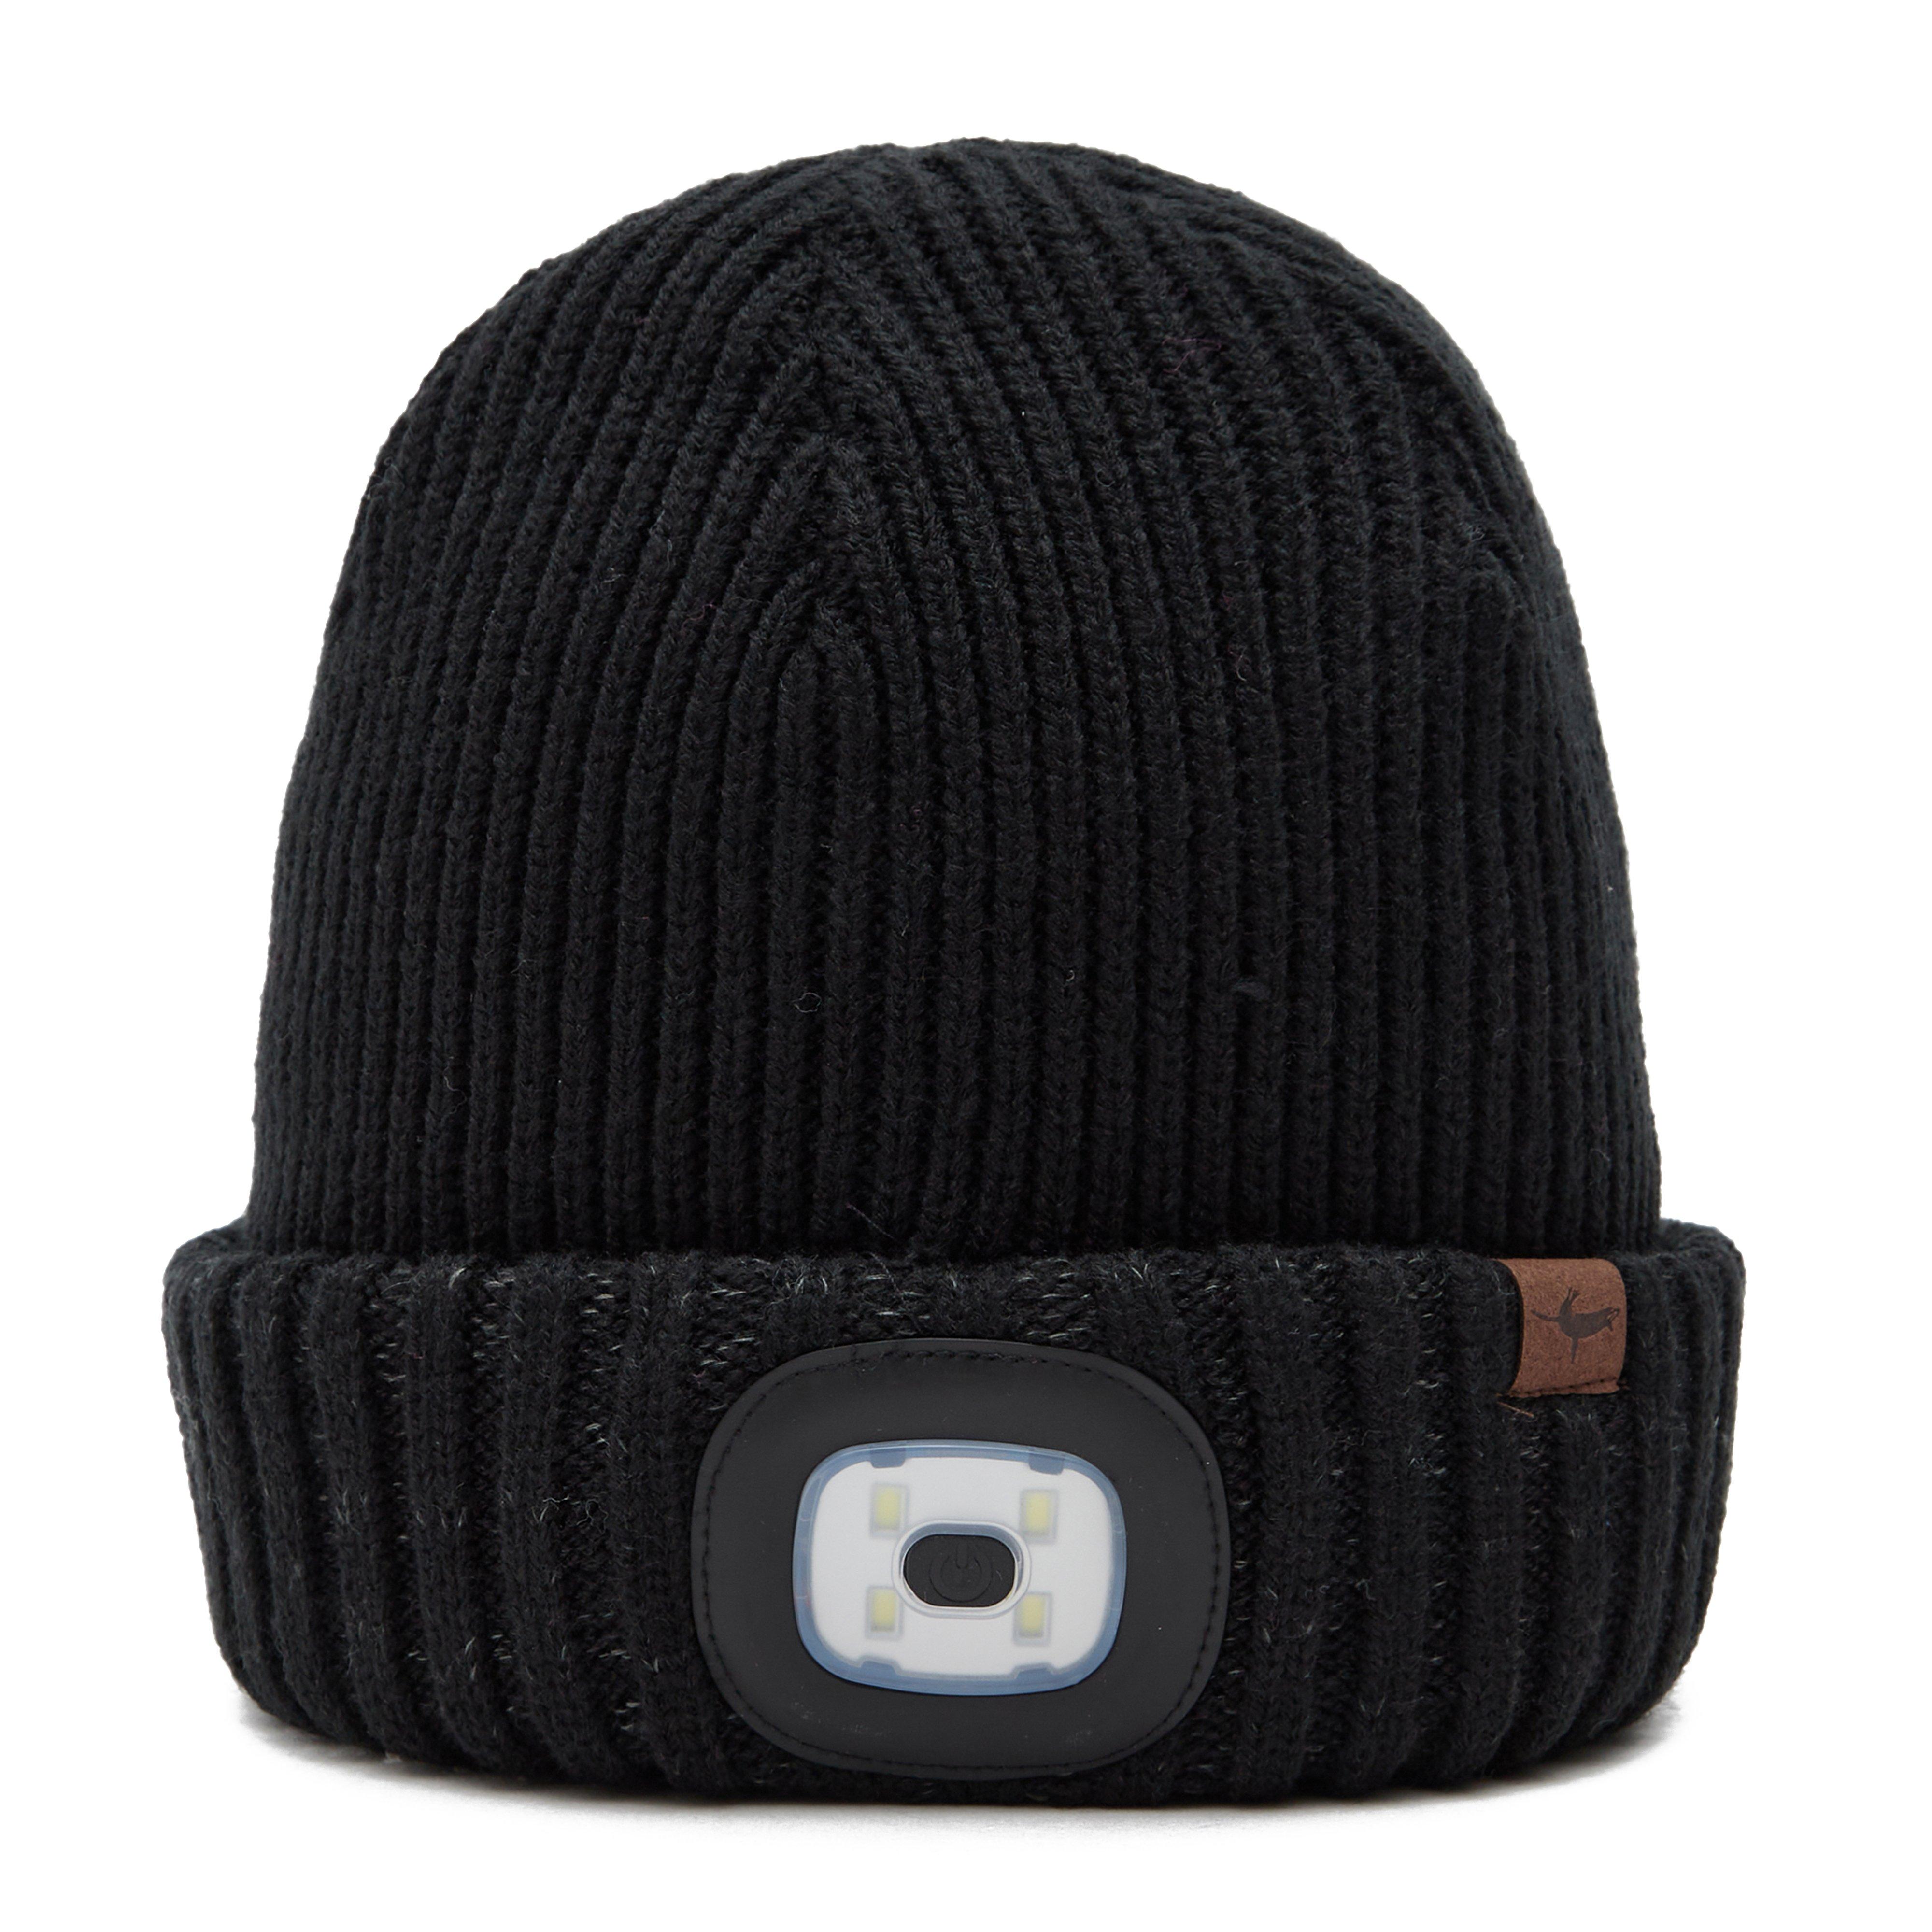 Waterproof Cold Weather LED Roll Cuff Beanie Hat Black